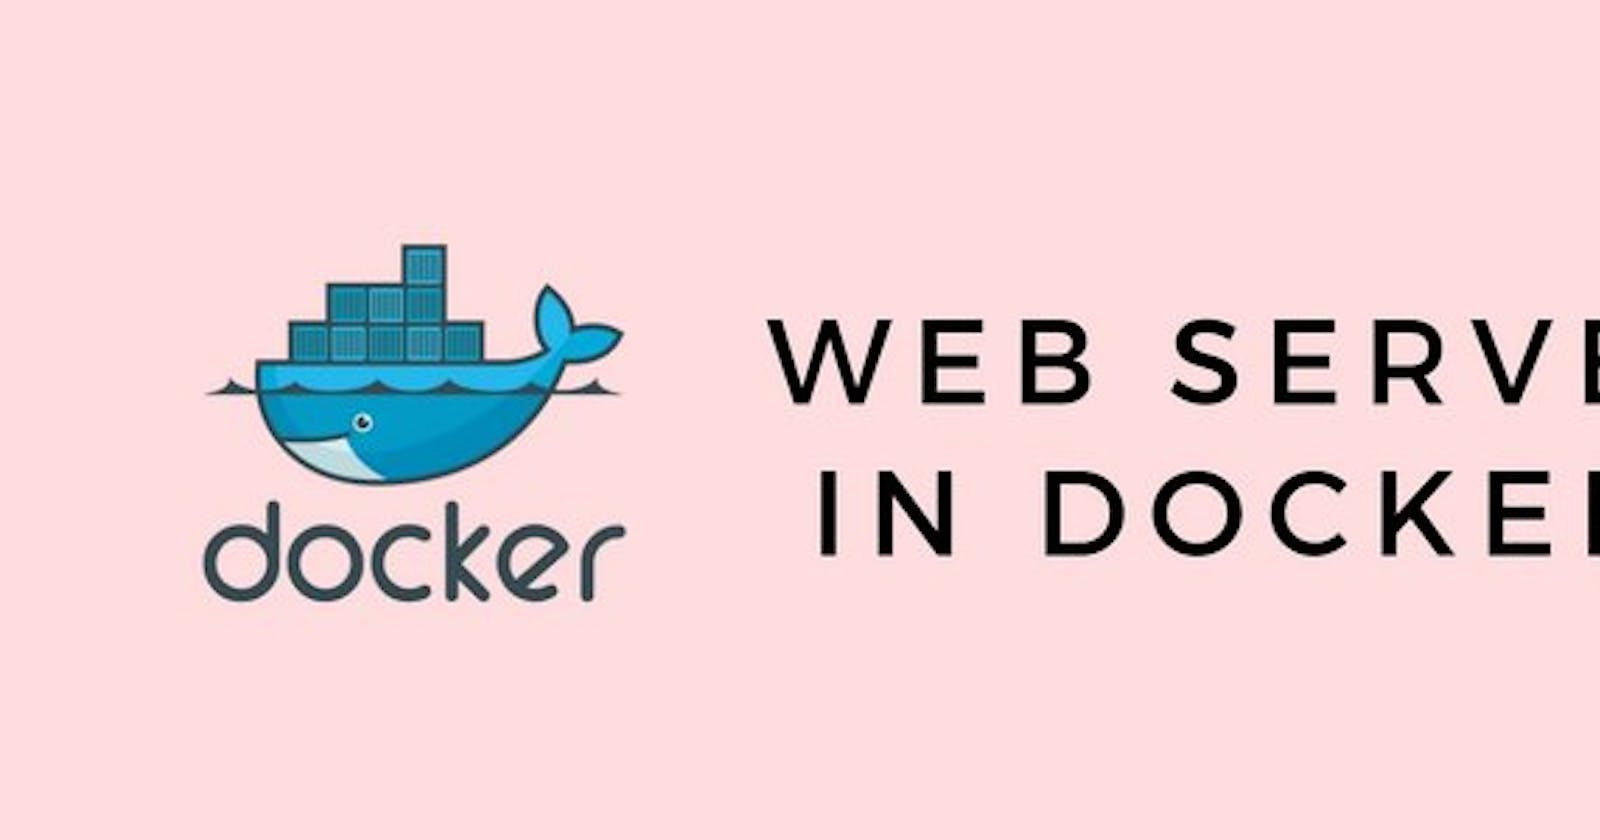 How to configure Web Server on Docker Container